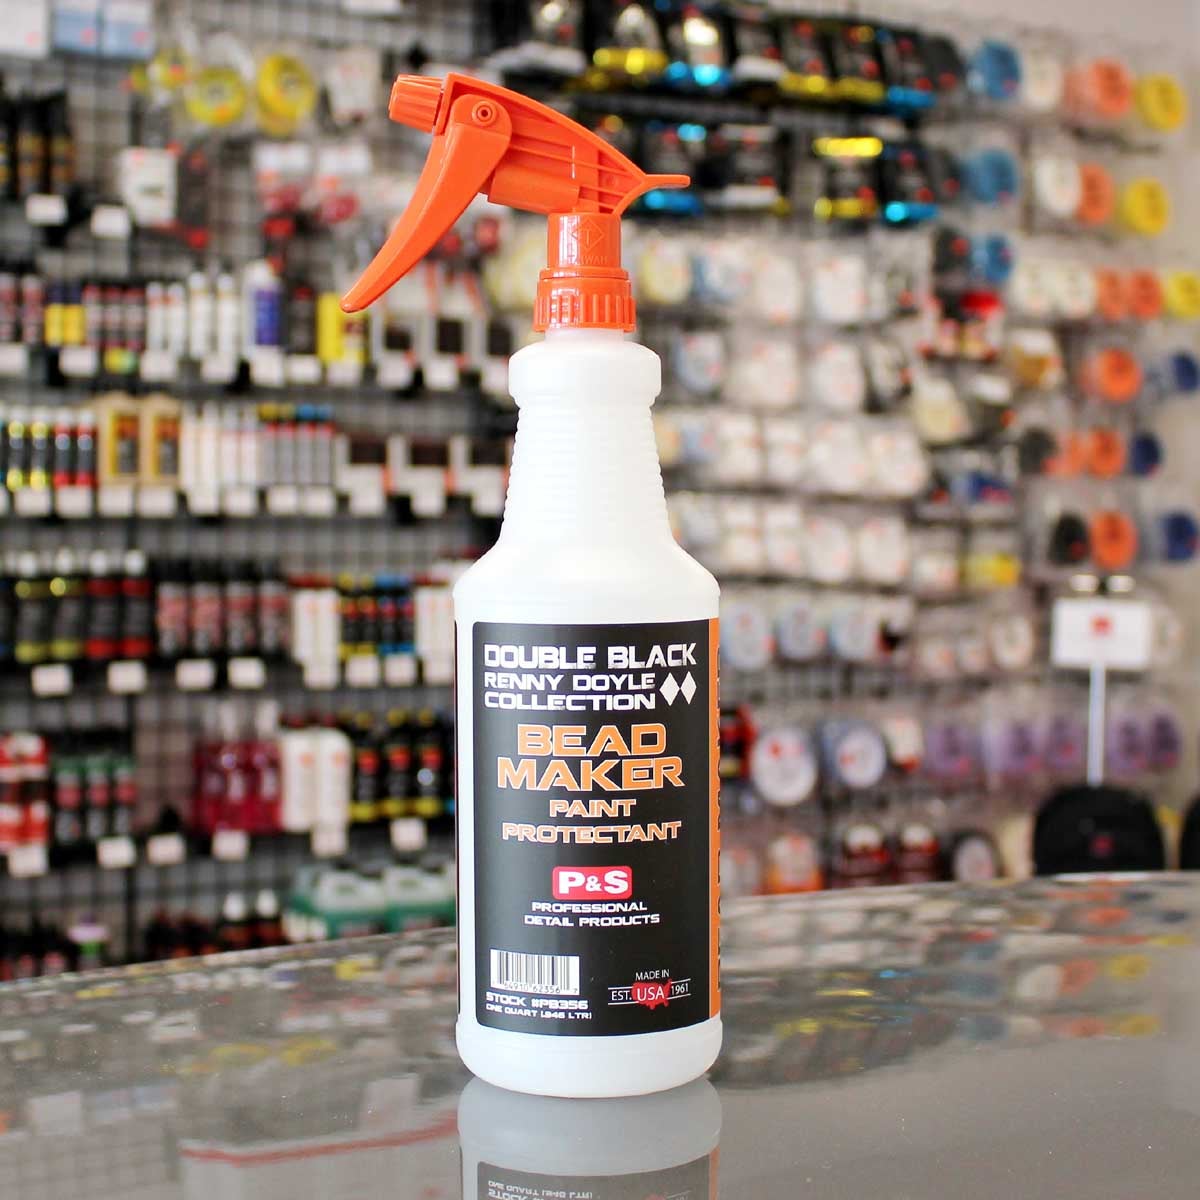 P & S PROFESSIONAL DETAIL PRODUCTS - Bead Maker - Paint Protectant &  Sealant, Easy Spray & Wipe Application, Cured Protection, Long Lasting  Gloss